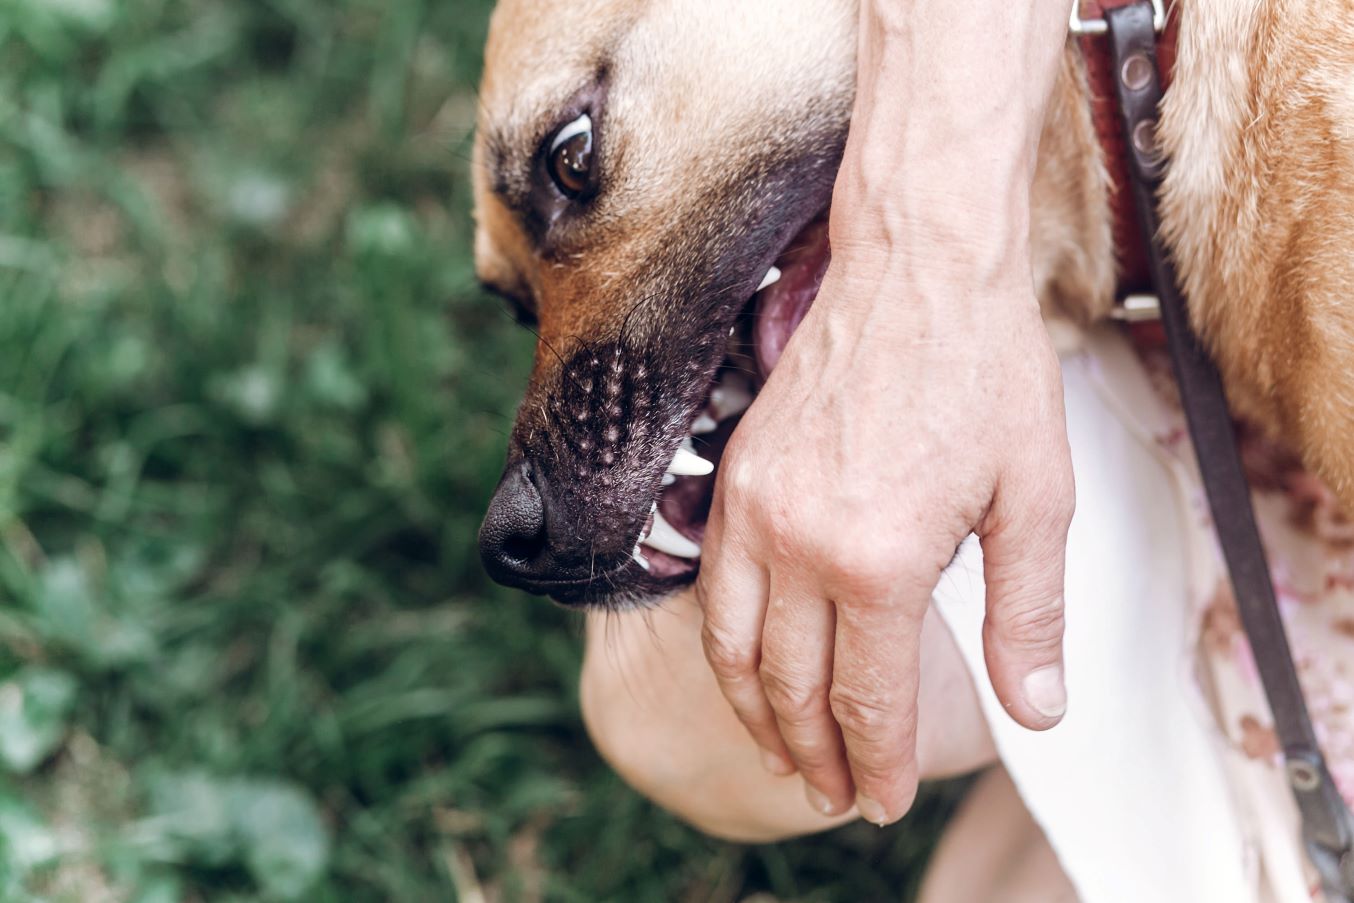 Dog biting a person's hand